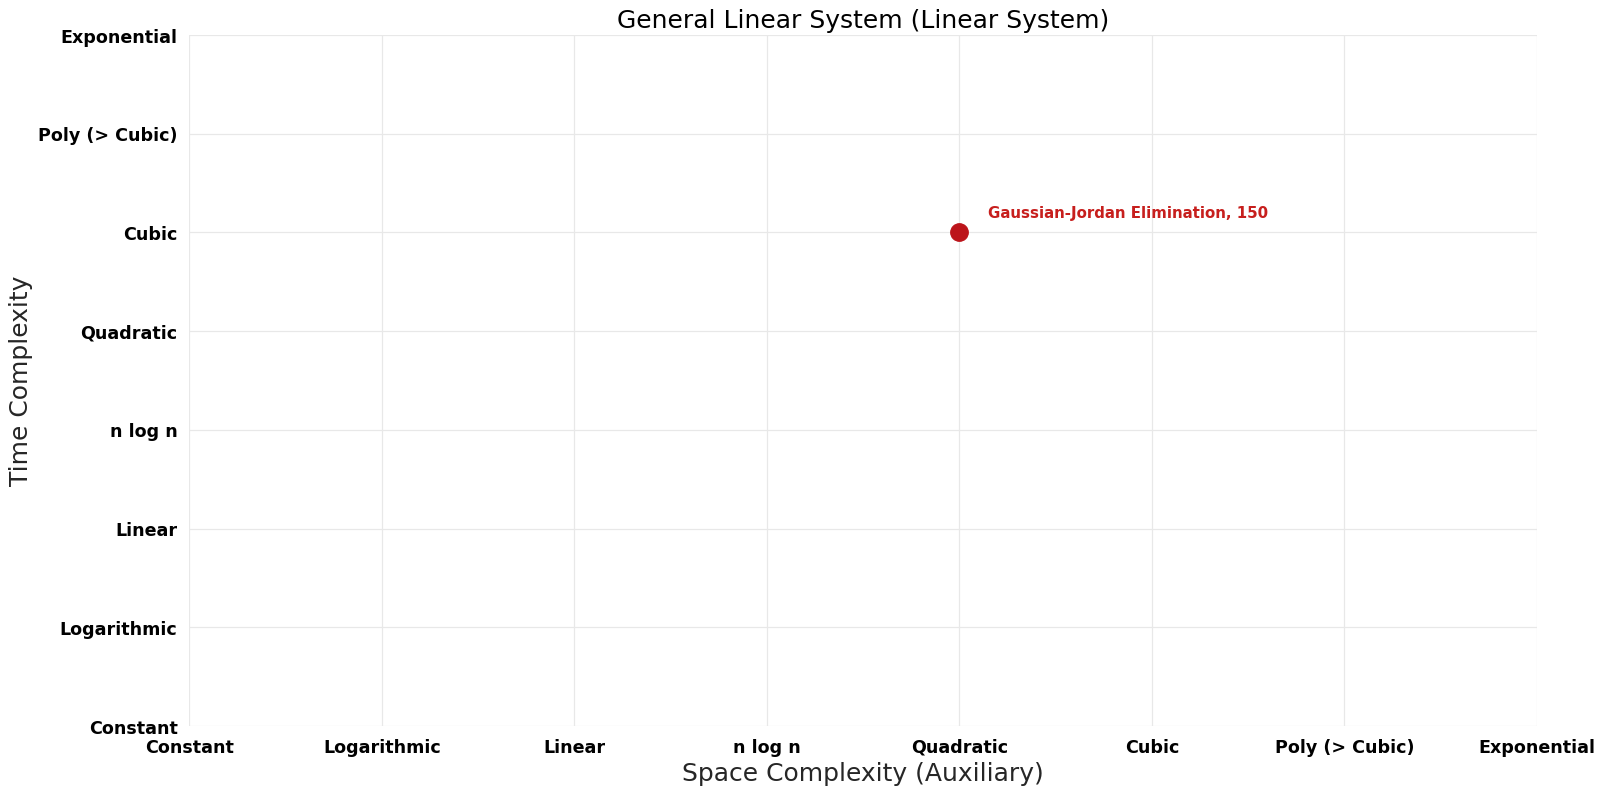 Linear System - General Linear System - Pareto Frontier.png